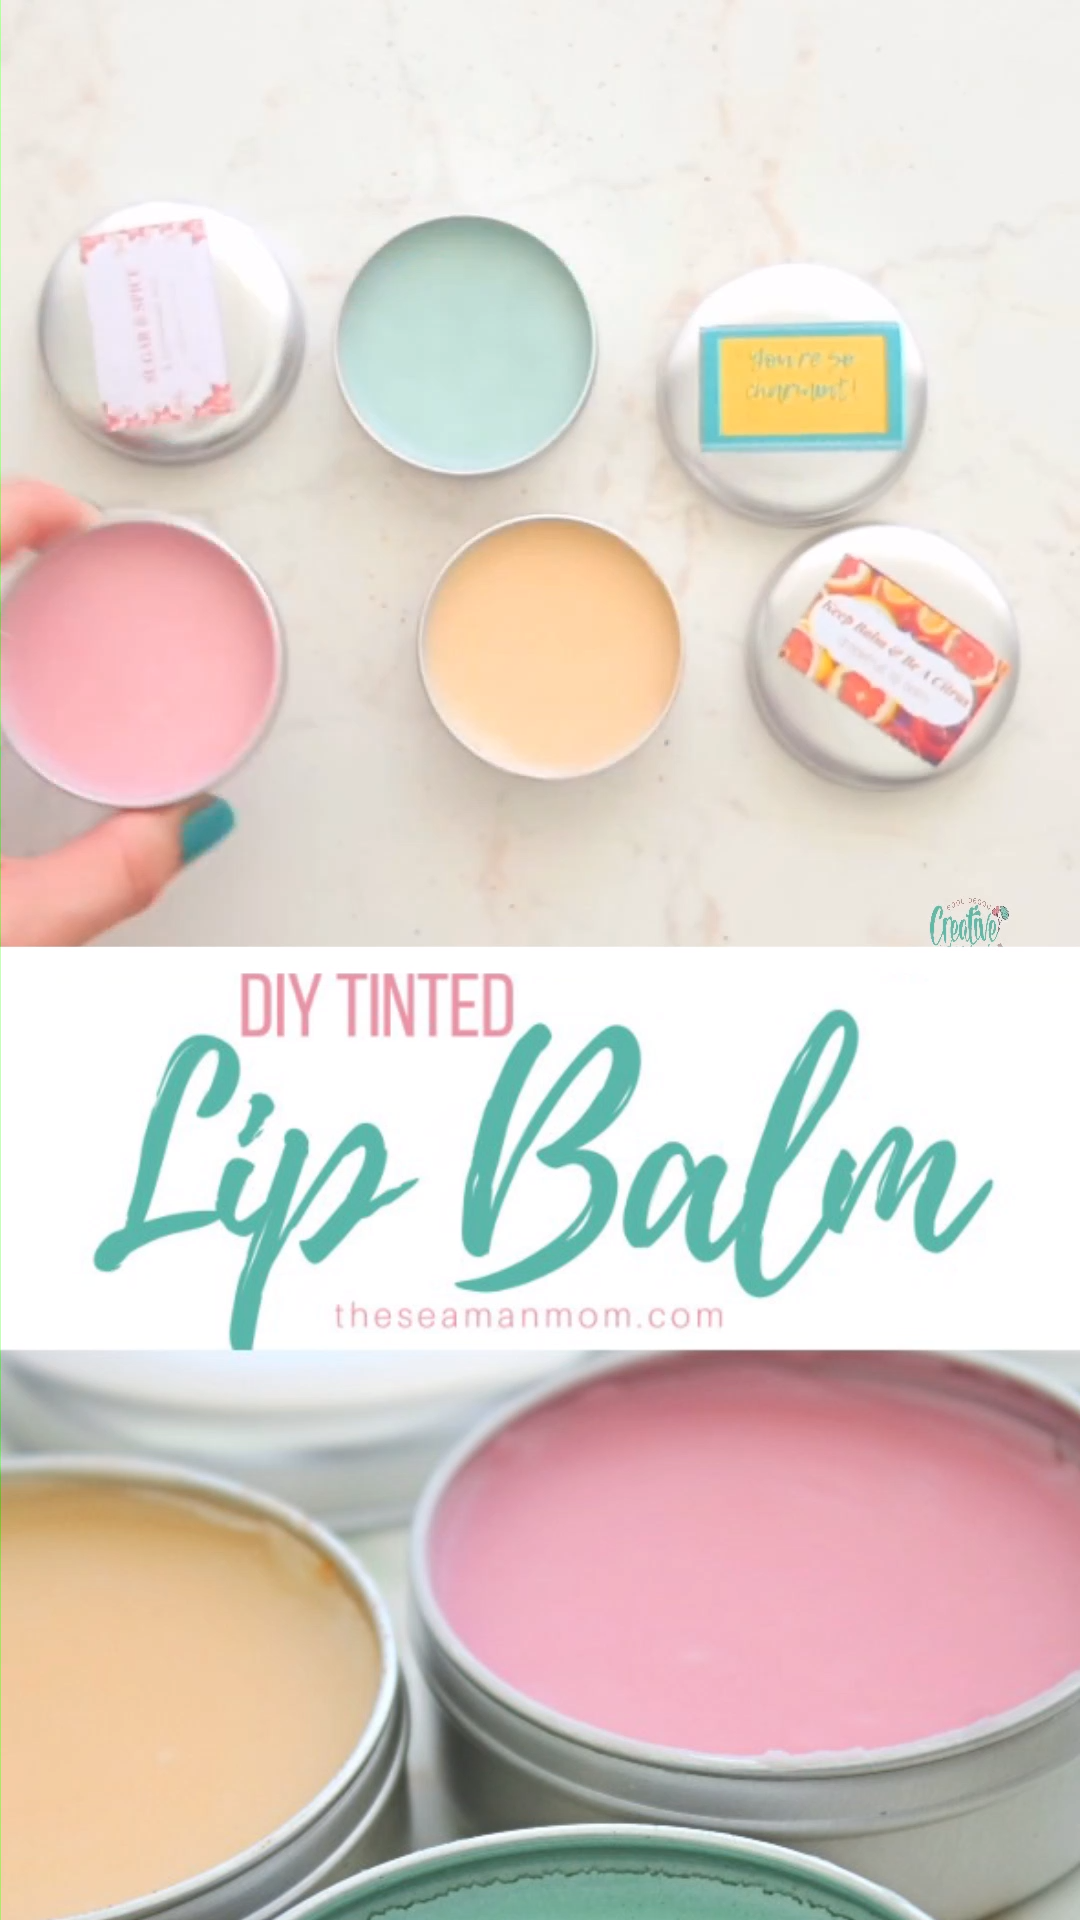 DIY TINTED LIP BALM - DIY TINTED LIP BALM -   18 diy Beauty products ideas